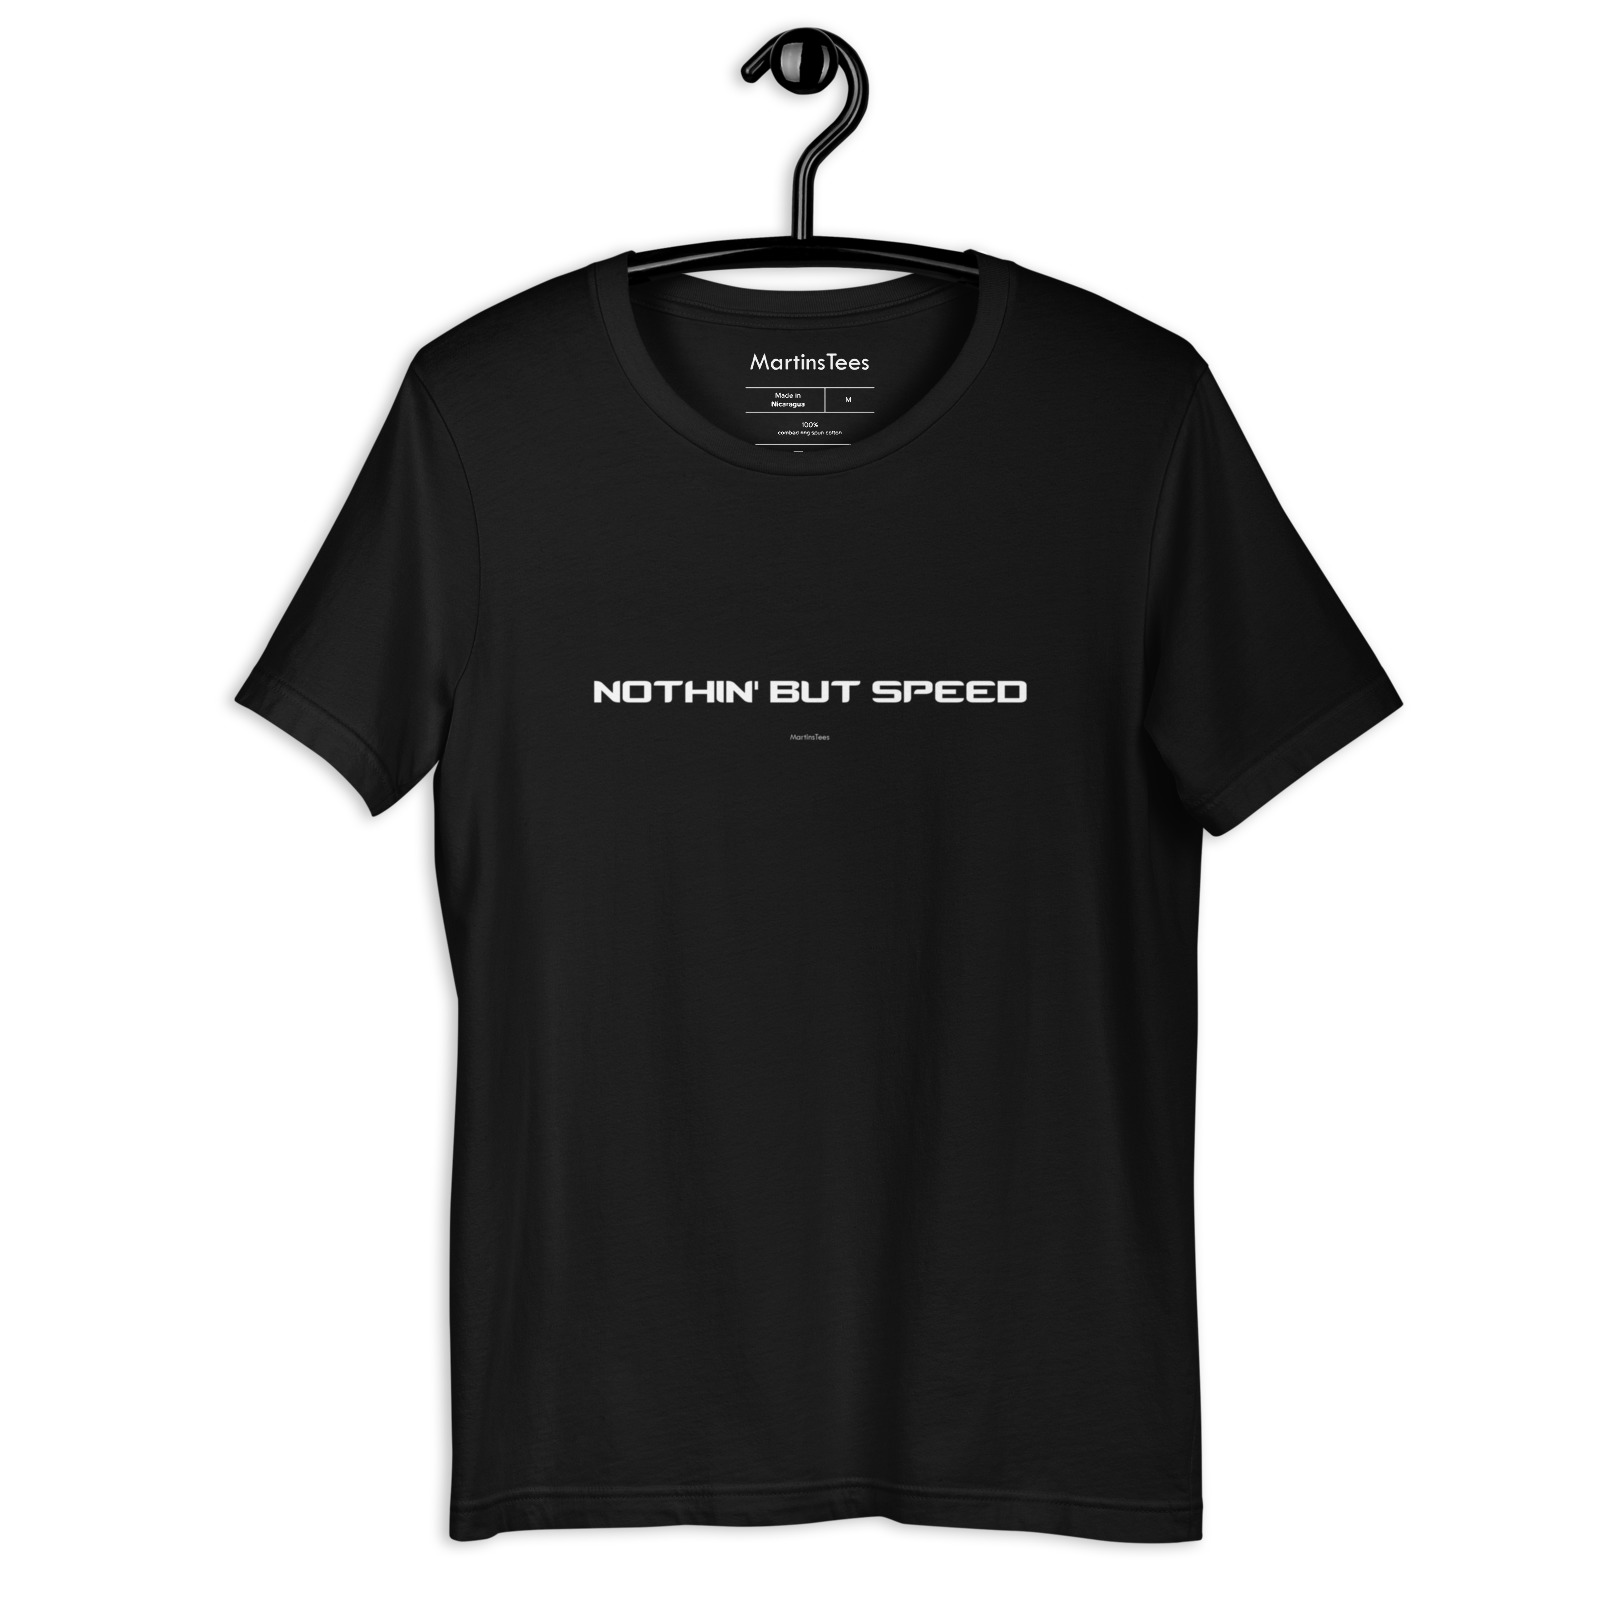 T-shirt: NOTHIN' BUT SPEED